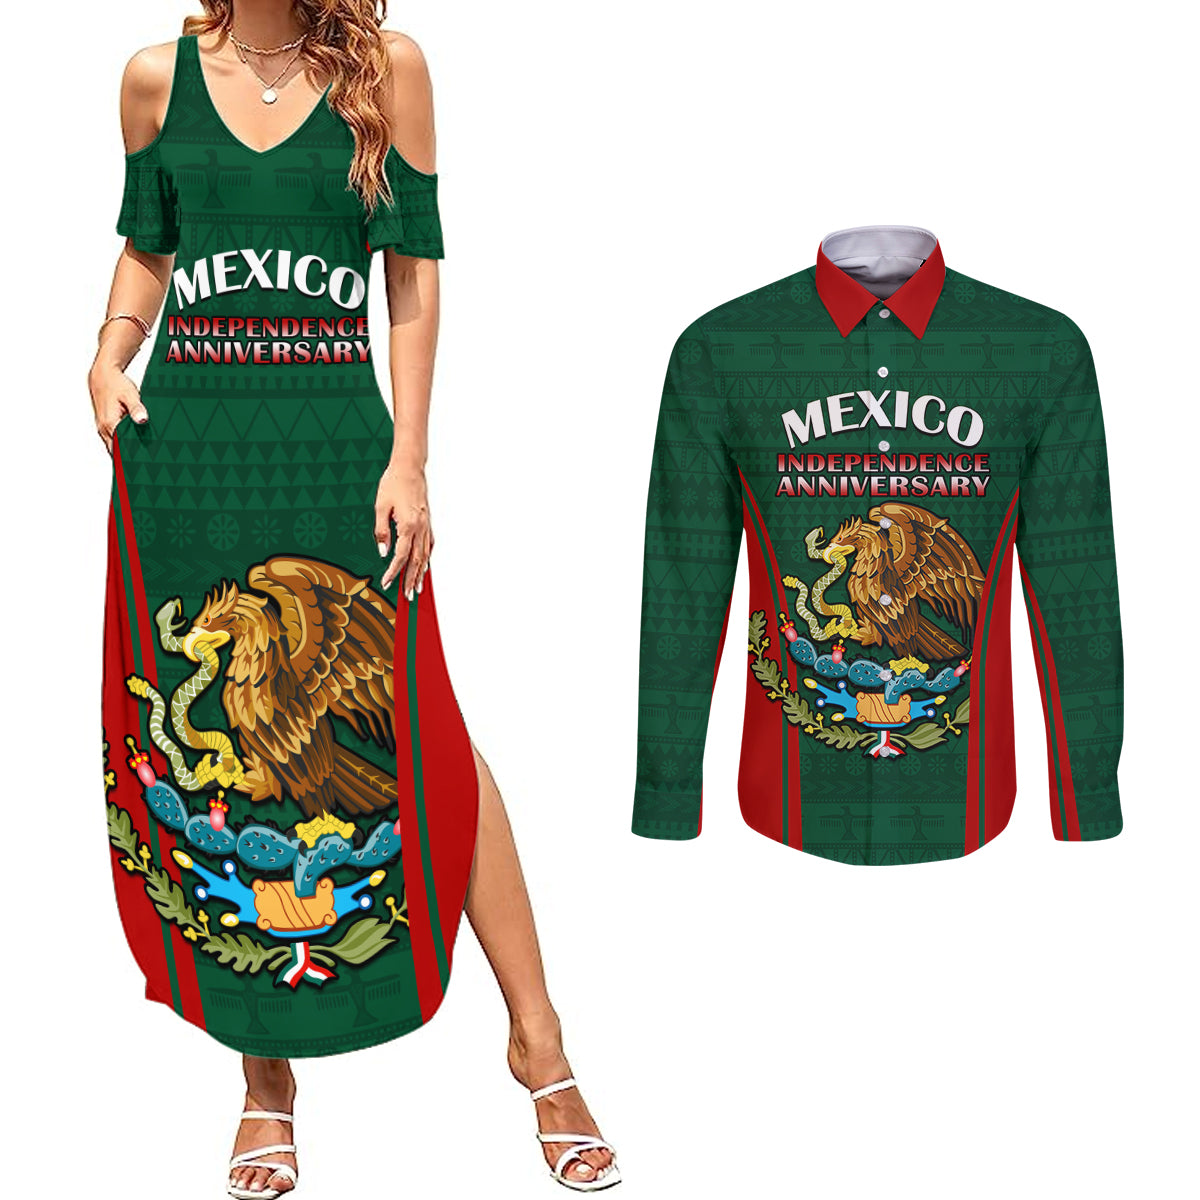 mexico-independence-day-couples-matching-summer-maxi-dress-and-long-sleeve-button-shirts-happy-213th-anniversary-mexican-proud